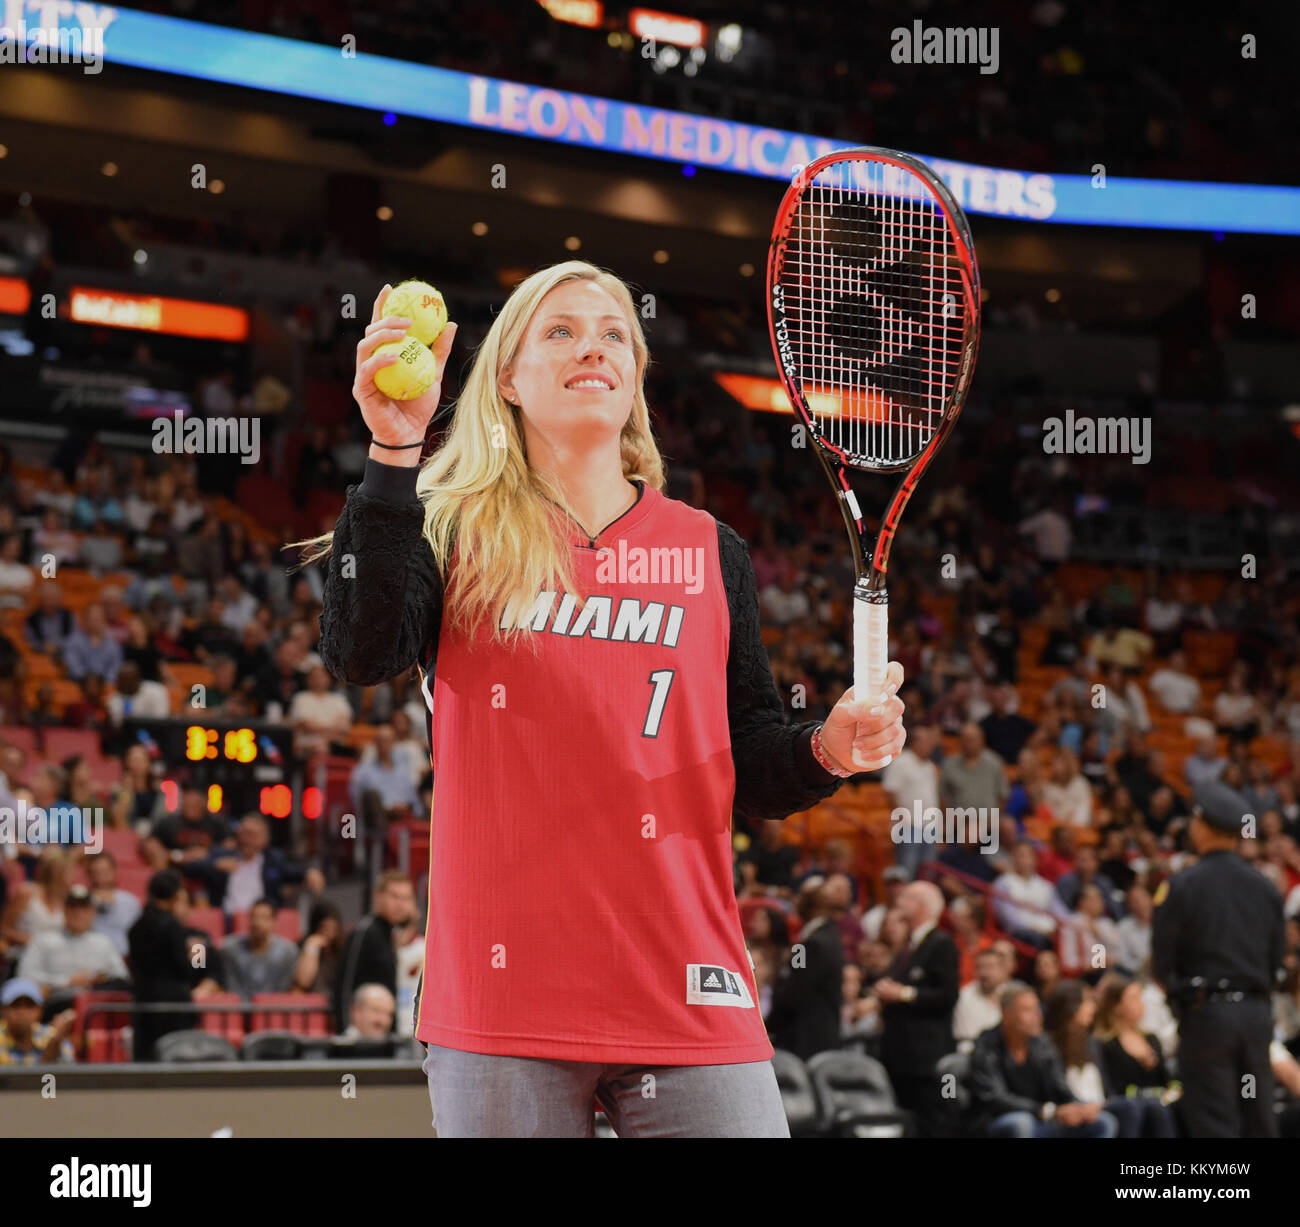 MIAMI, FL - MARCH 21: Tennis Player Angelique Kerber at the Miami Heat game  on March 21, 2017 at American Airlines Arena in Miami, Florida. People:  Angelique Kerber Transmission Ref: FLXX Stock Photo - Alamy